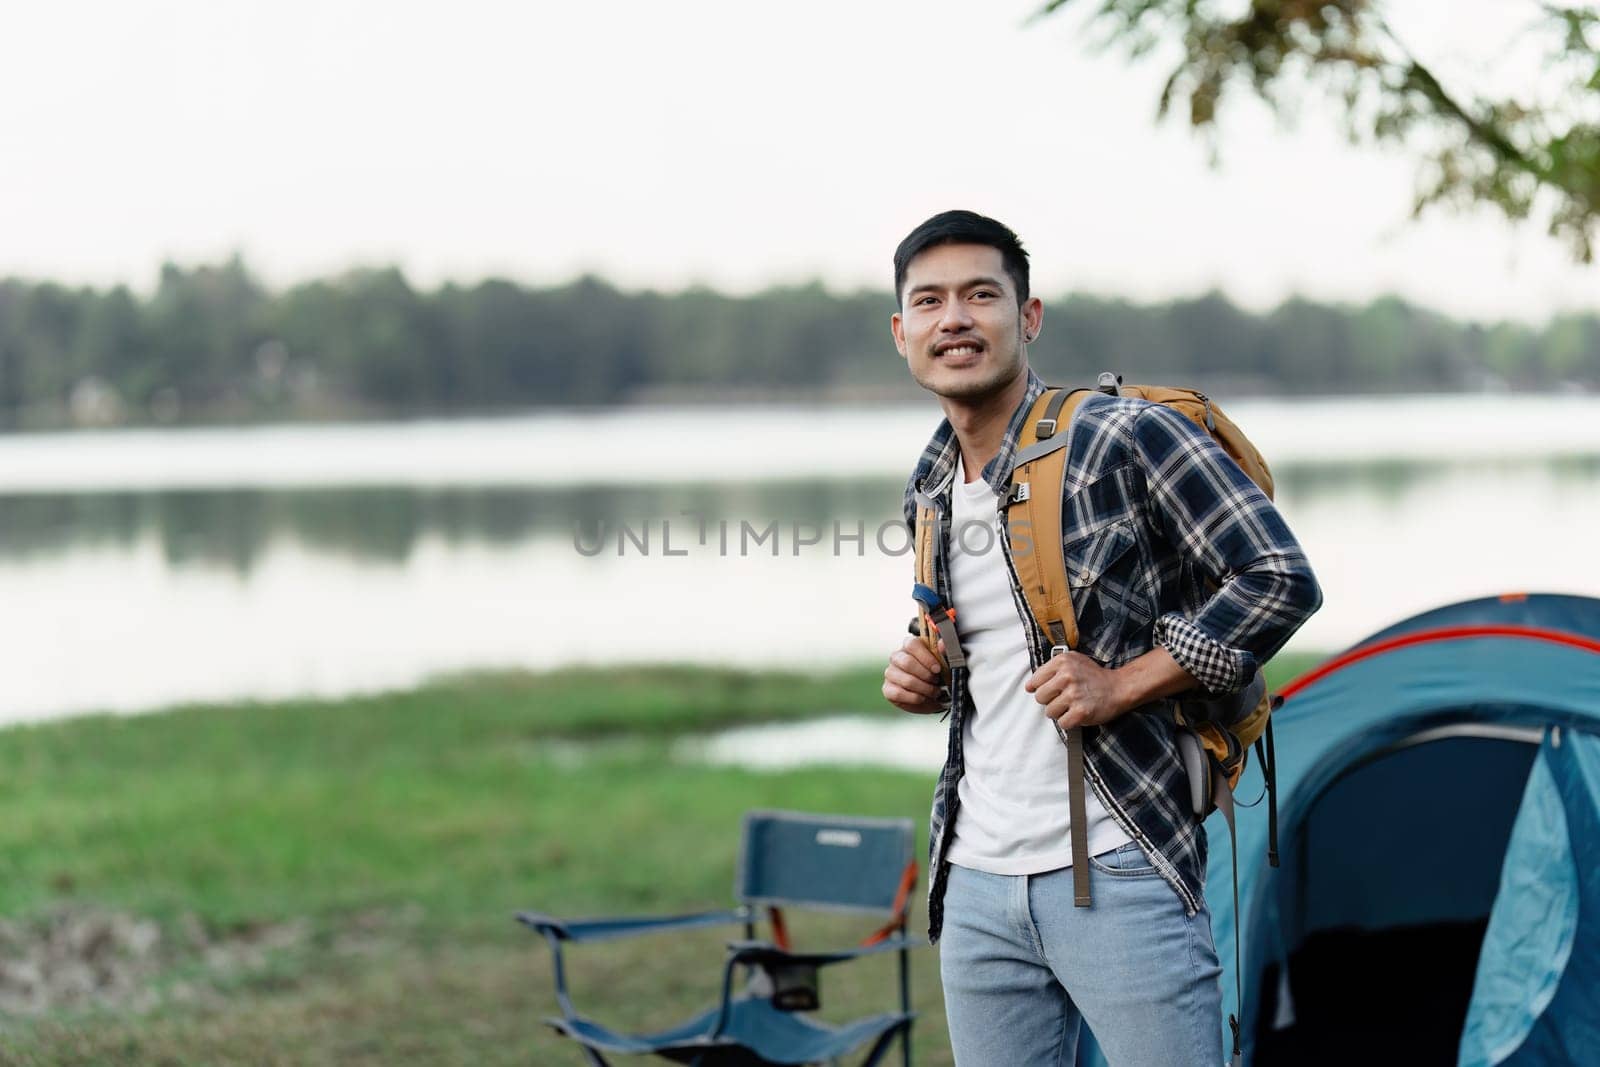 A young man with a backpack stands near a tent by the lake, ready for a travel camping adventure in a beautiful outdoor setting.